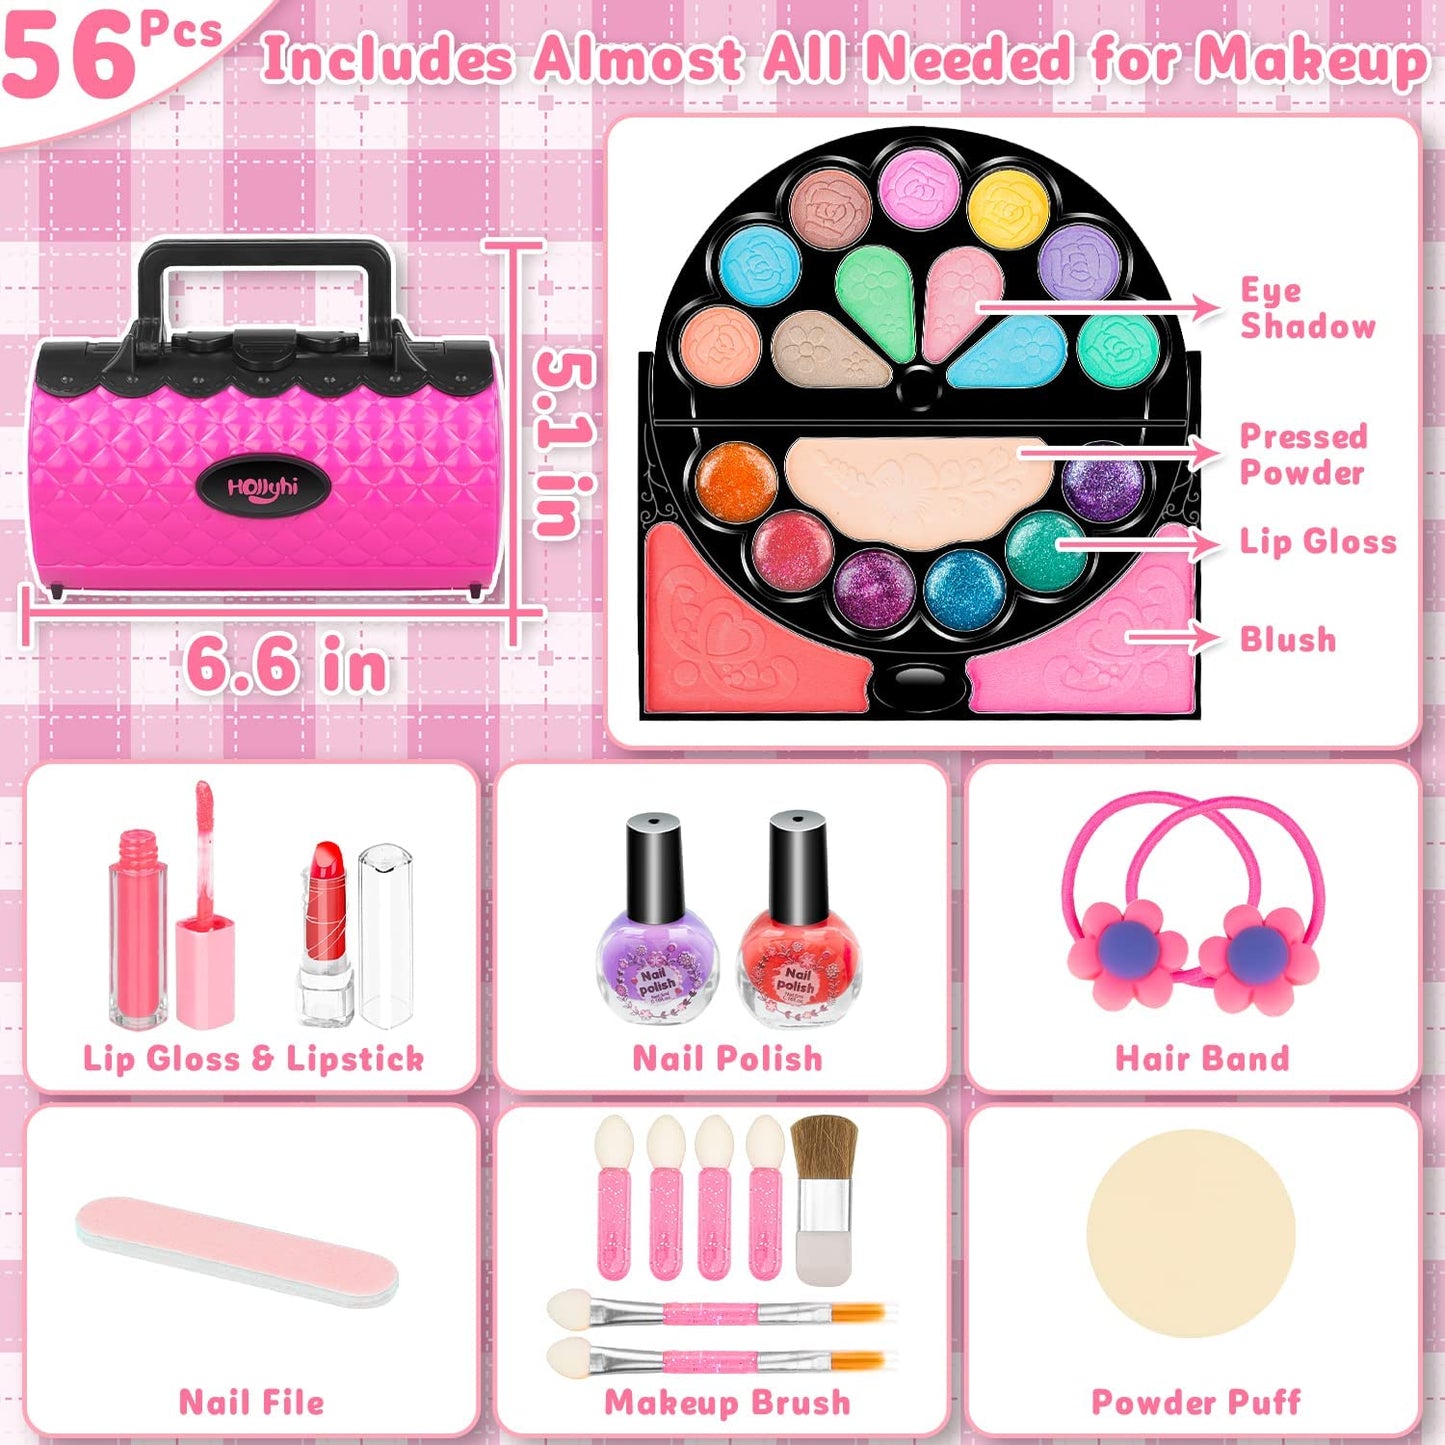 56 Pcs Real Kids Makeup Kit for Girls, Washable Pretend Play Makeup Toy Set with Cosmetic Case for Girl, Toddler Make up Toys Birthday for Kids 3 4 5 6 7 8 9 10 11 12 Years Old